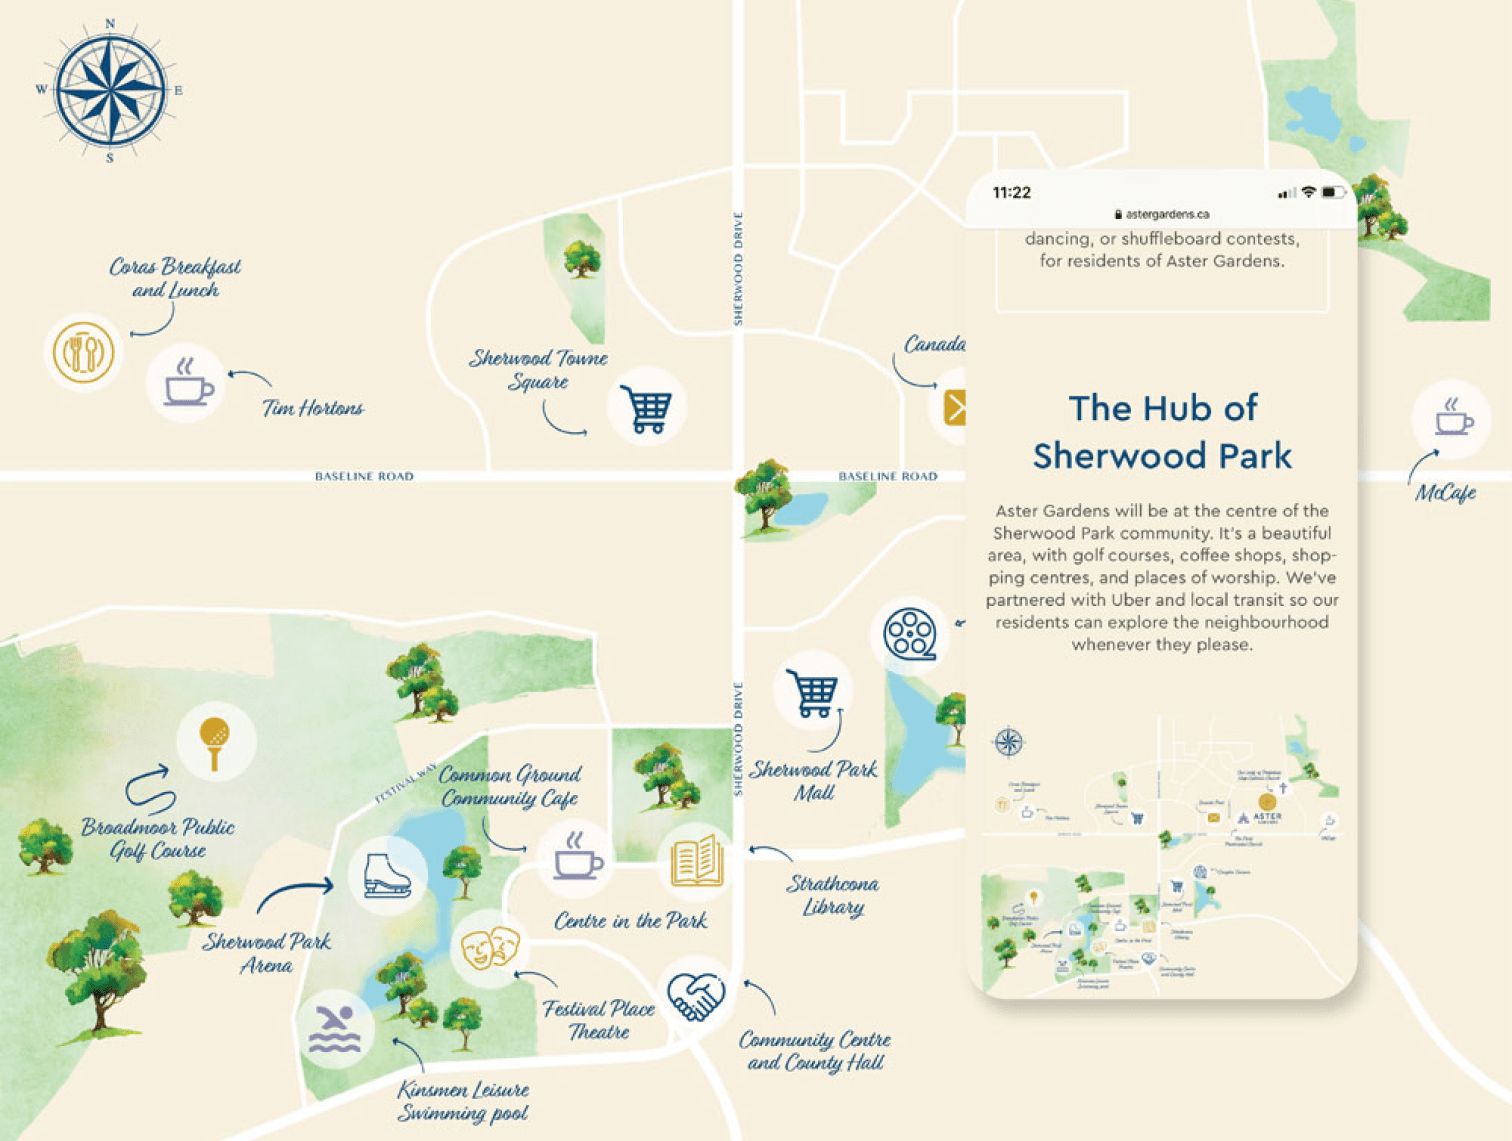 A custom-designed map of the Sherwood area and Aster Gardens location to surrounding amenities.